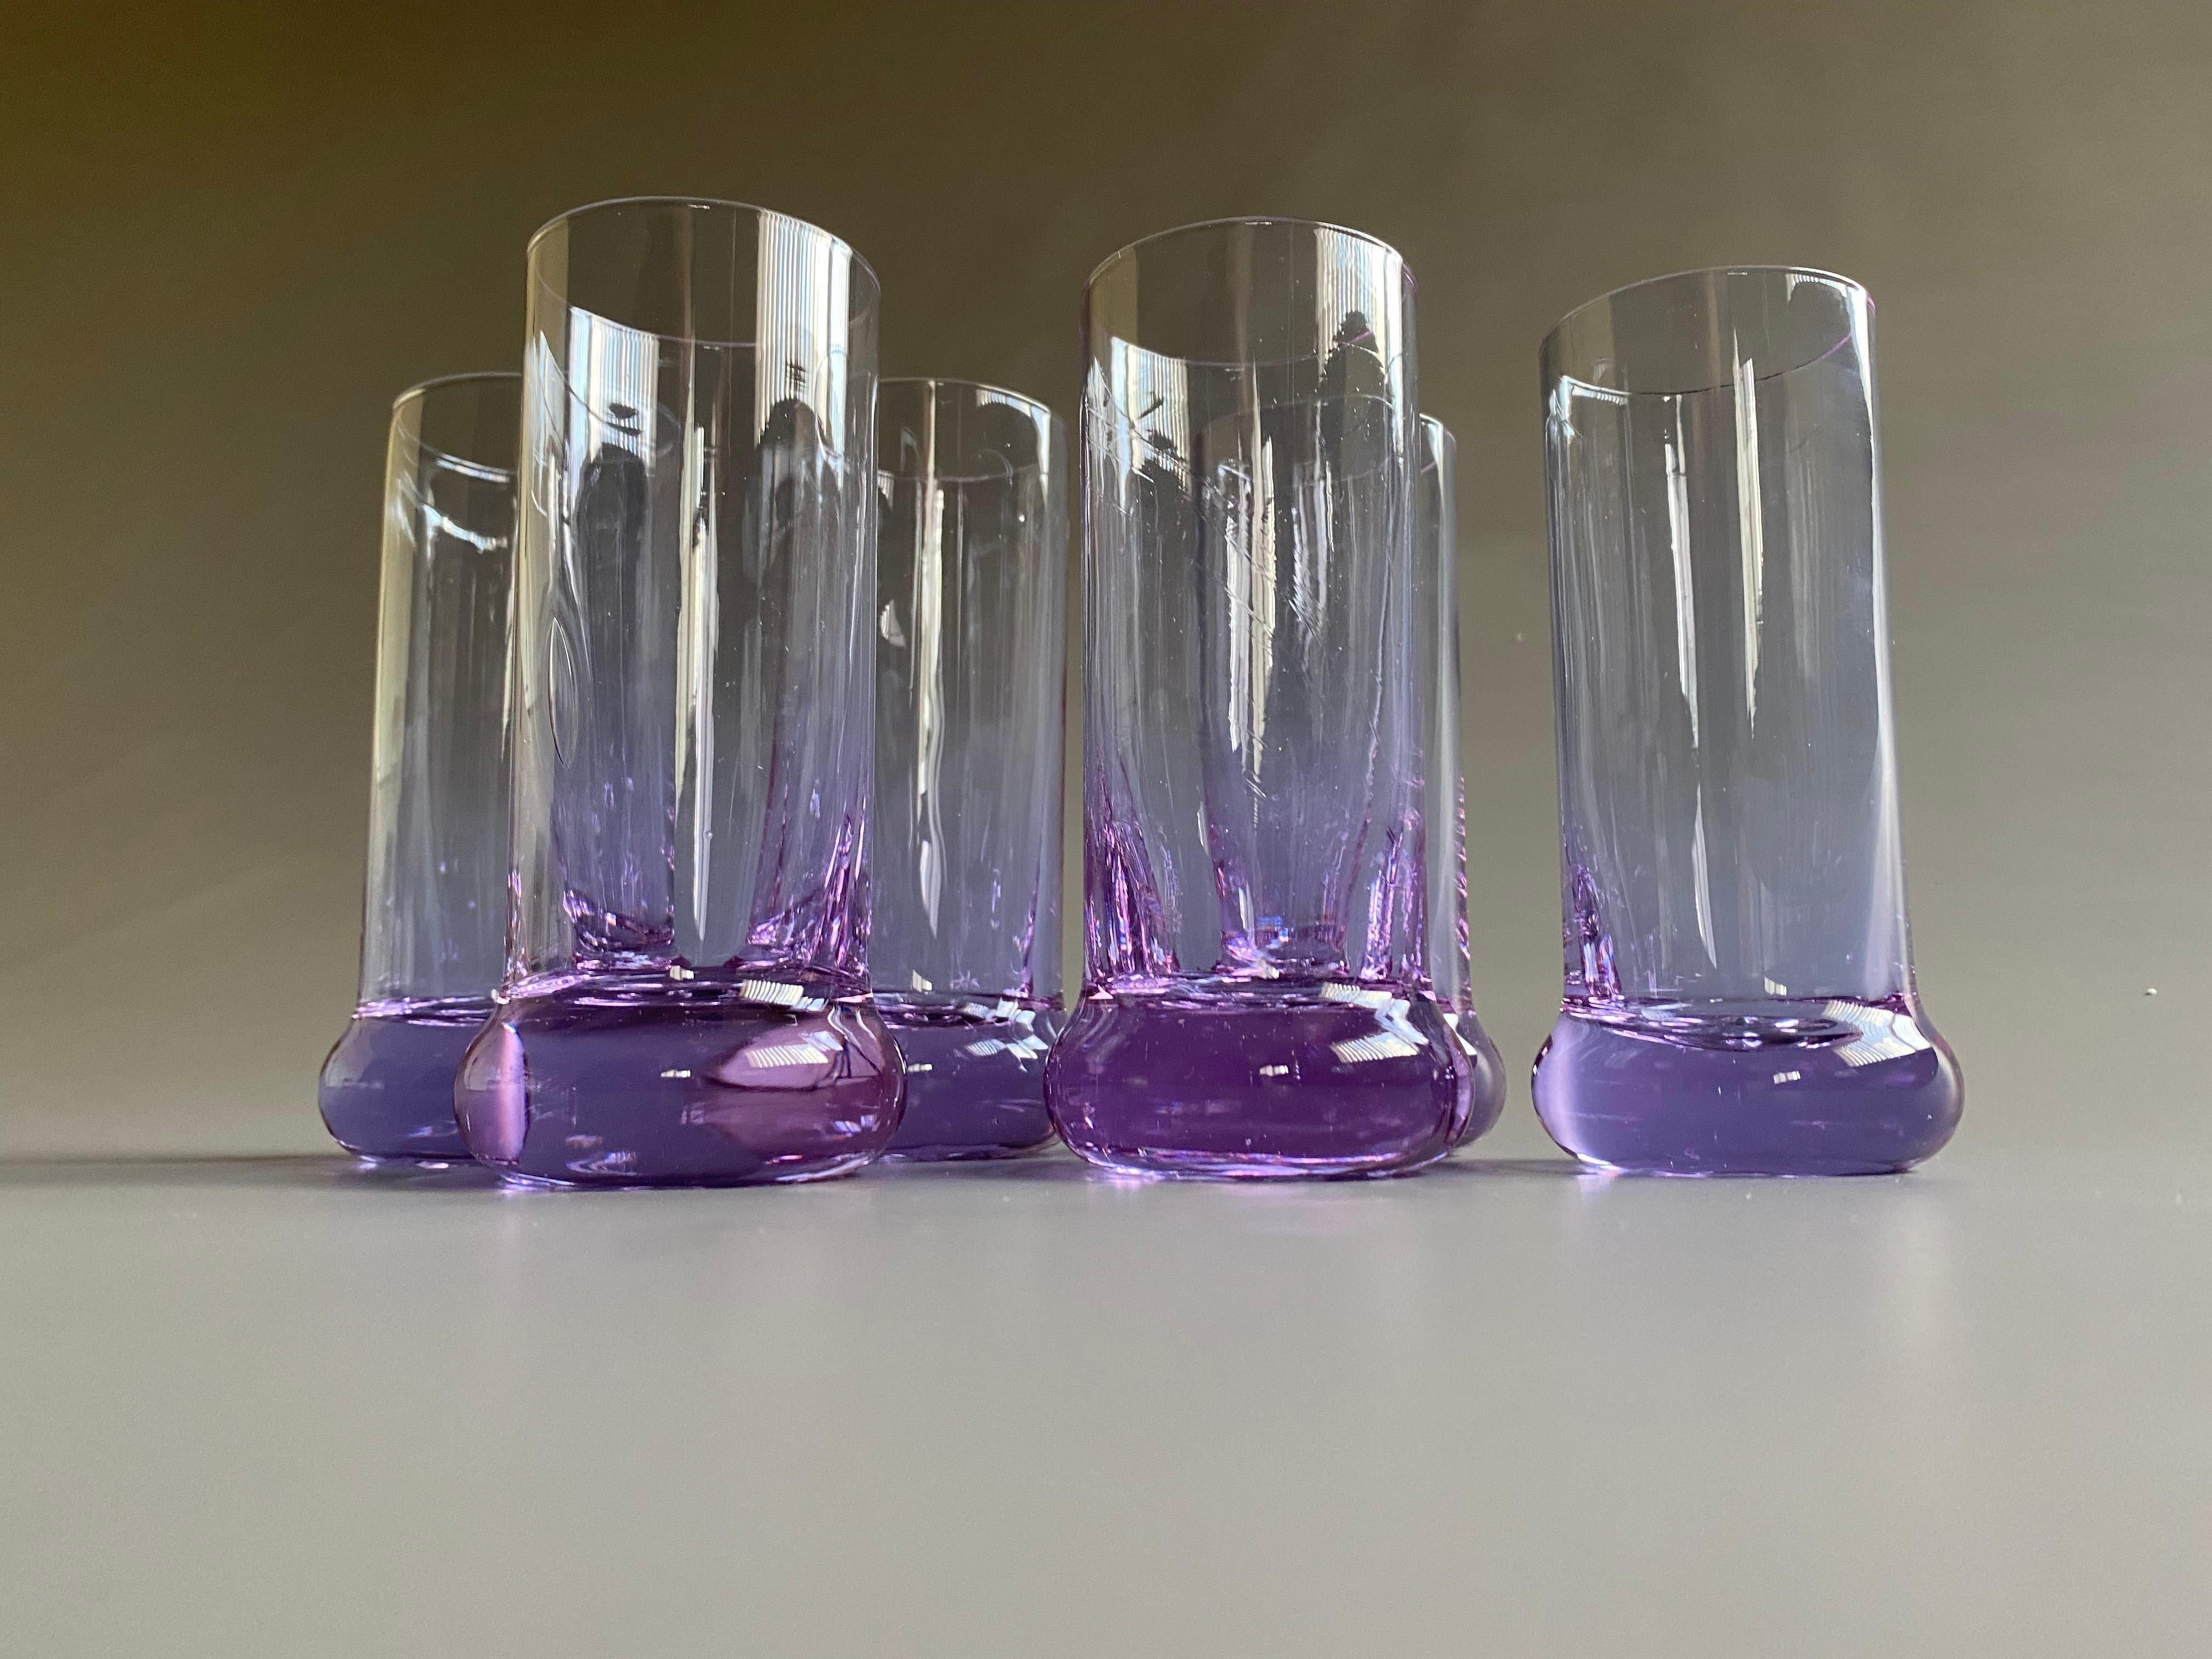 Stylish and elegant set of 6 hand blown long drink glasses from the 1970's. Produced by Arnolfo di Cambio in Italy. Depending on the light, the glasses are either purple or light blue as can be seen in the images. The set is without any damage.
The